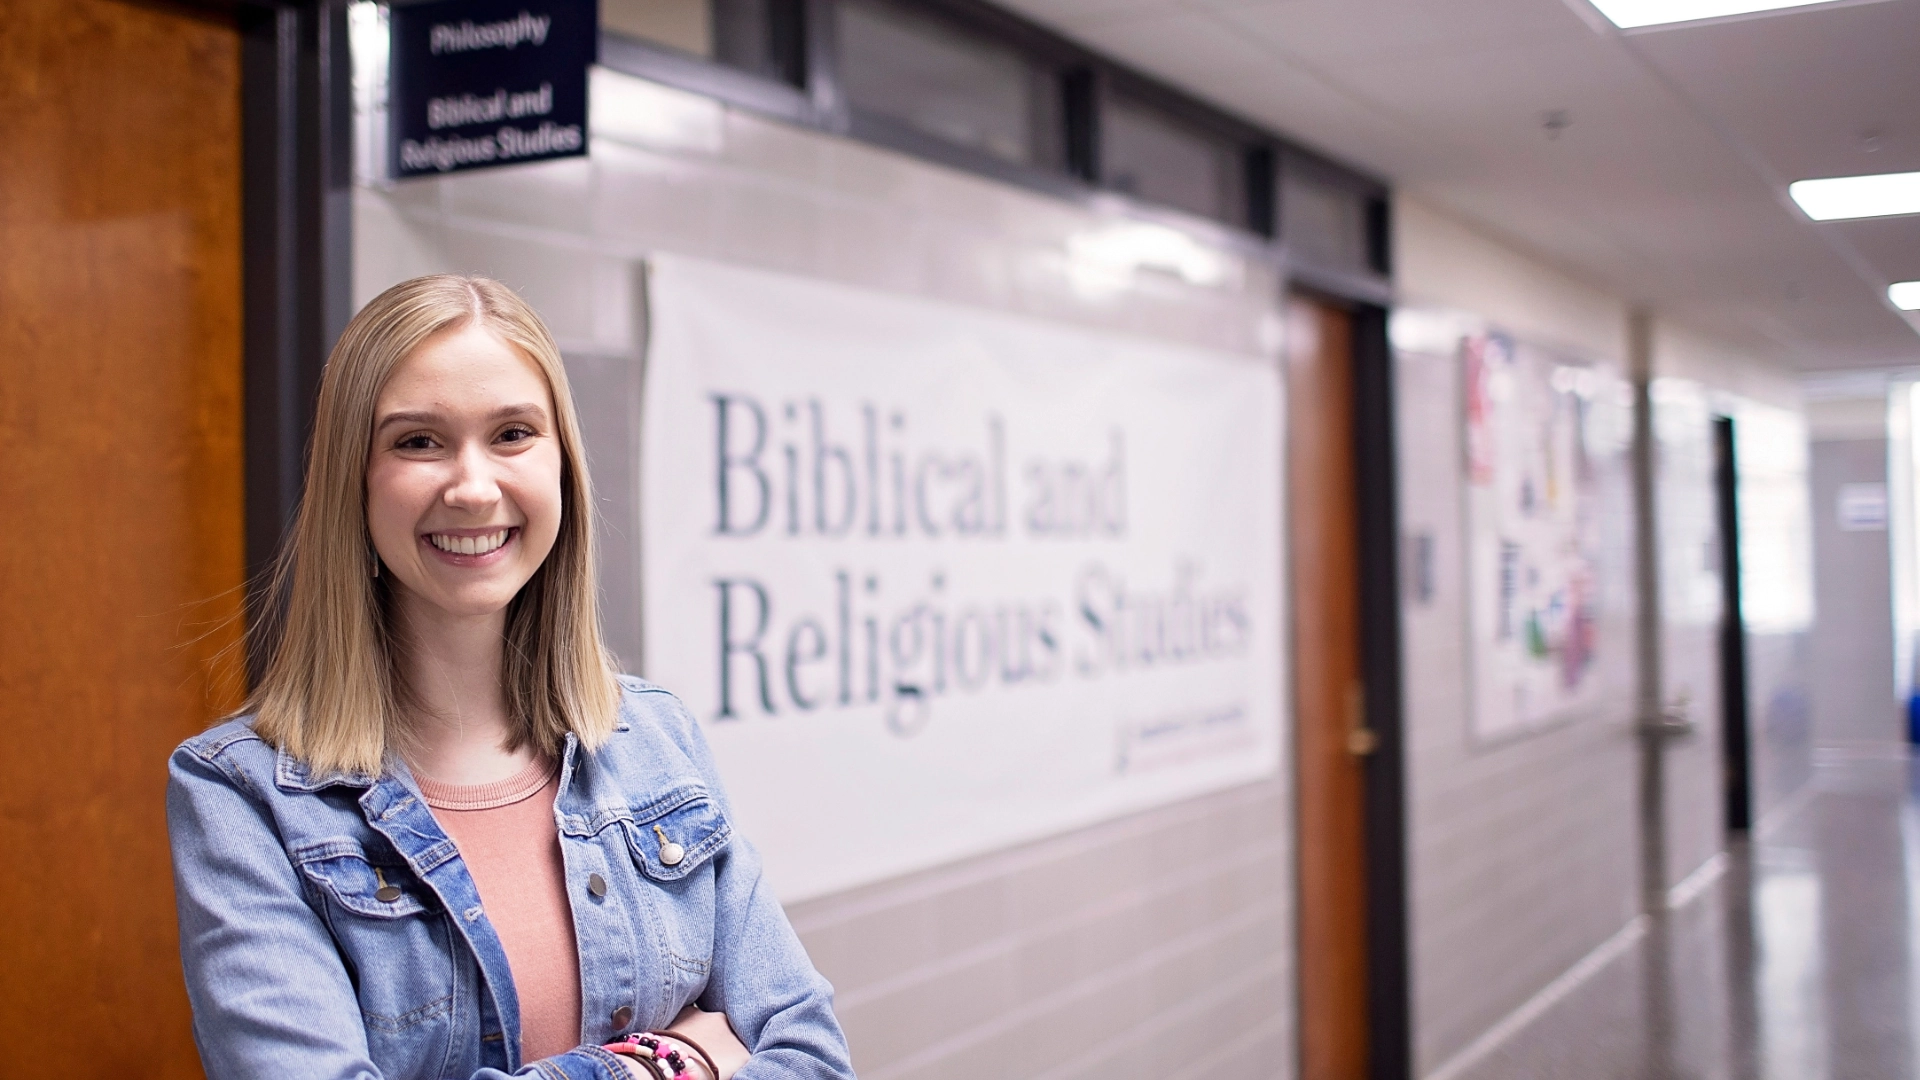 Biblical And Religious Studies Female Student in Hallway